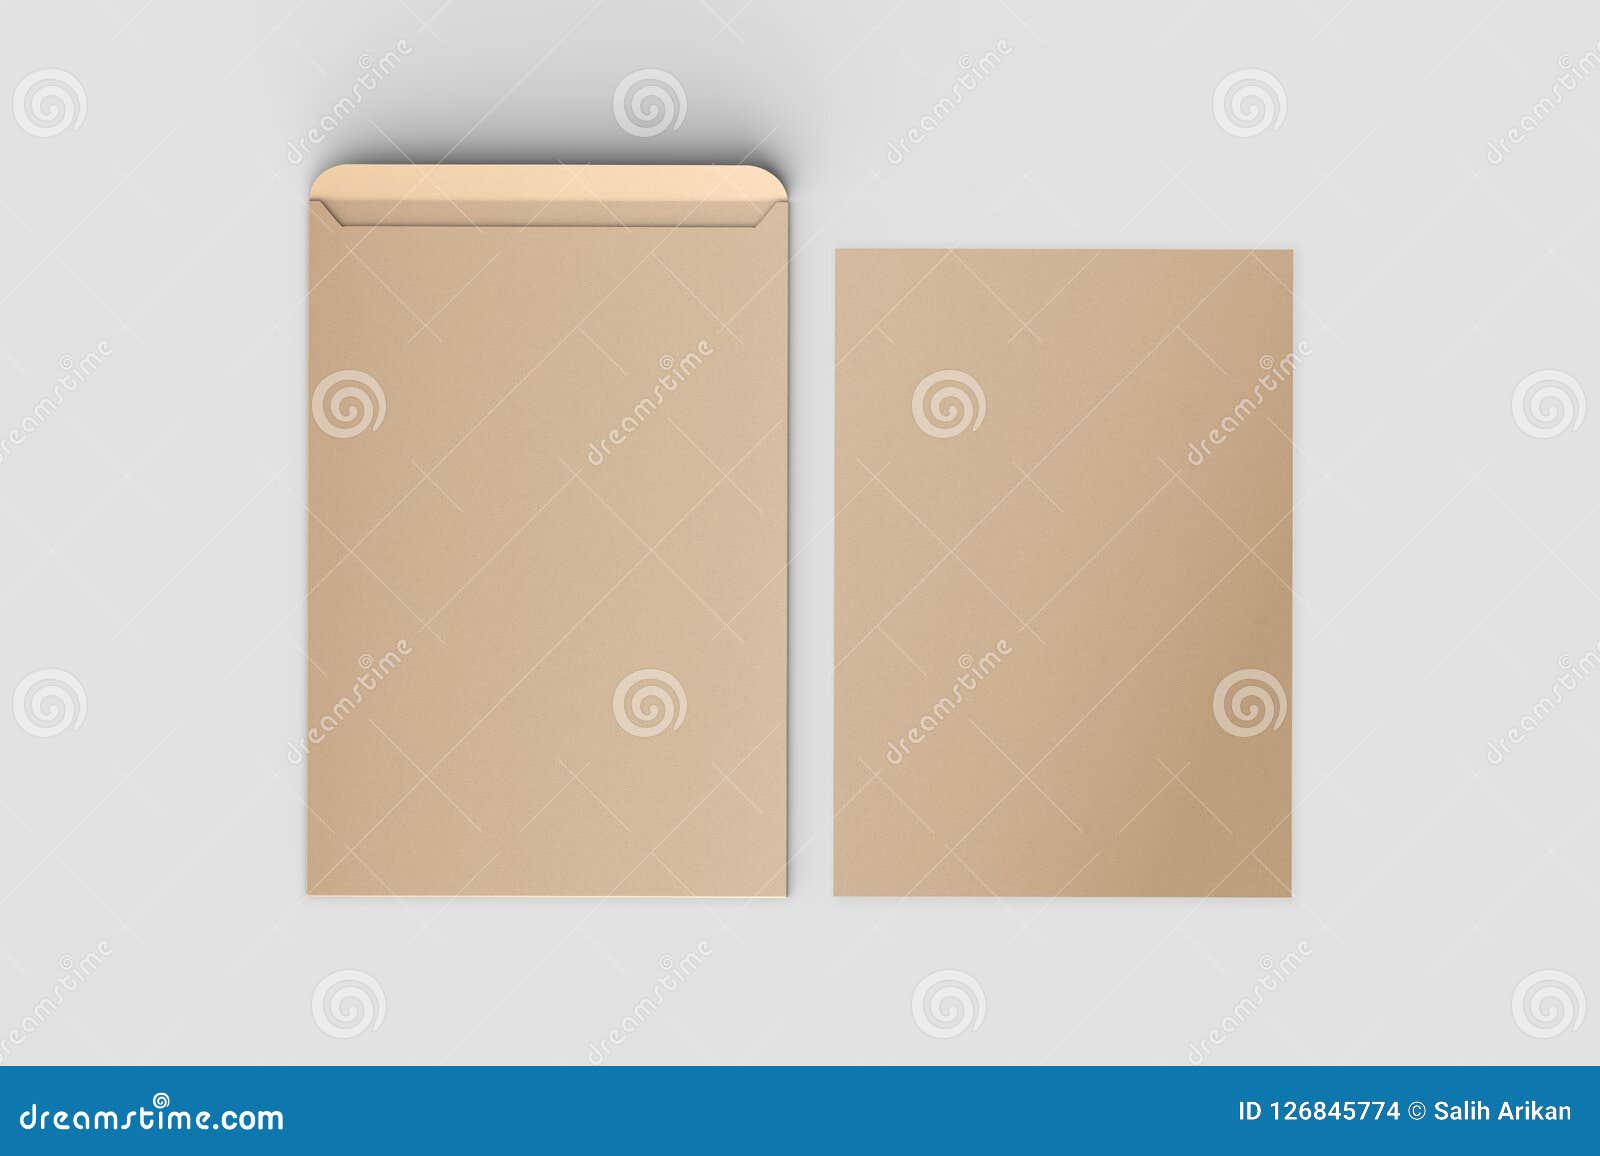 Download Recycled Paper C4 Envelope Mock Up Isolated On Soft Gray Background. 3D Illustration Stock Photo ...